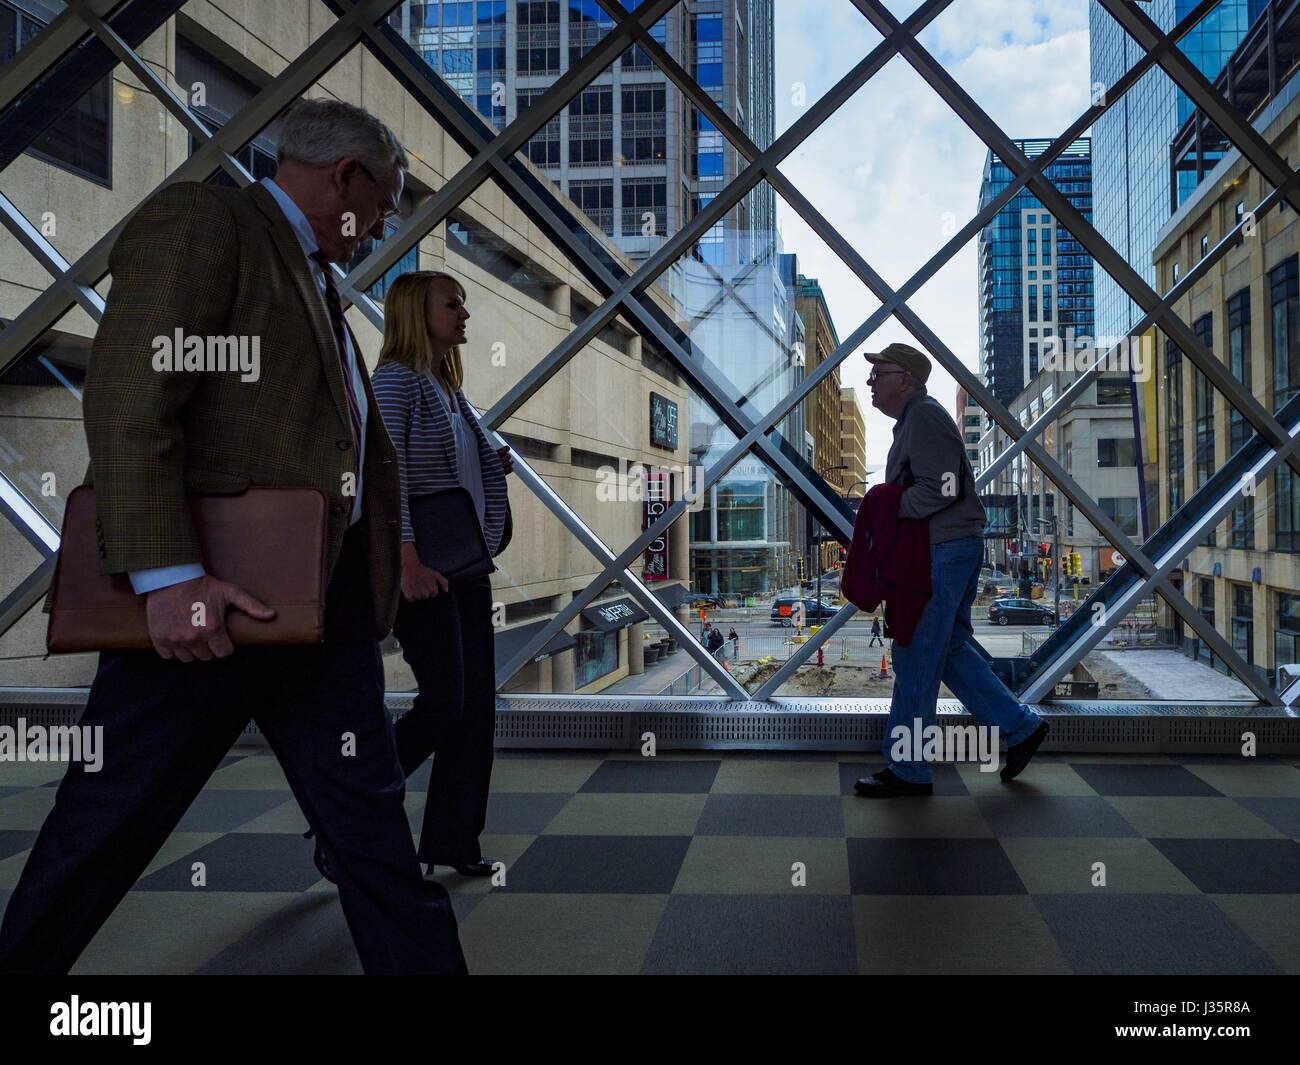 May 3, 2017 - Minneapolis, Minnesota, U.S - People in the skyway over 5th Street in downtown Minneapolis. The skyways are enclosed pedestrian overpasses that connect downtown buildings. The Minneapolis Skyway was started in the early 1960s as a response to covered shopping malls in the suburbs that were drawing shoppers out of the downtown area. The system grew sporadically until 1974, when the construction of the IDS Center and its center atrium, called the Crystal Court, served as a hub for the downtown skyway system. There are 8 miles of skyways, connecting most of the downtown buildings fr Stock Photo